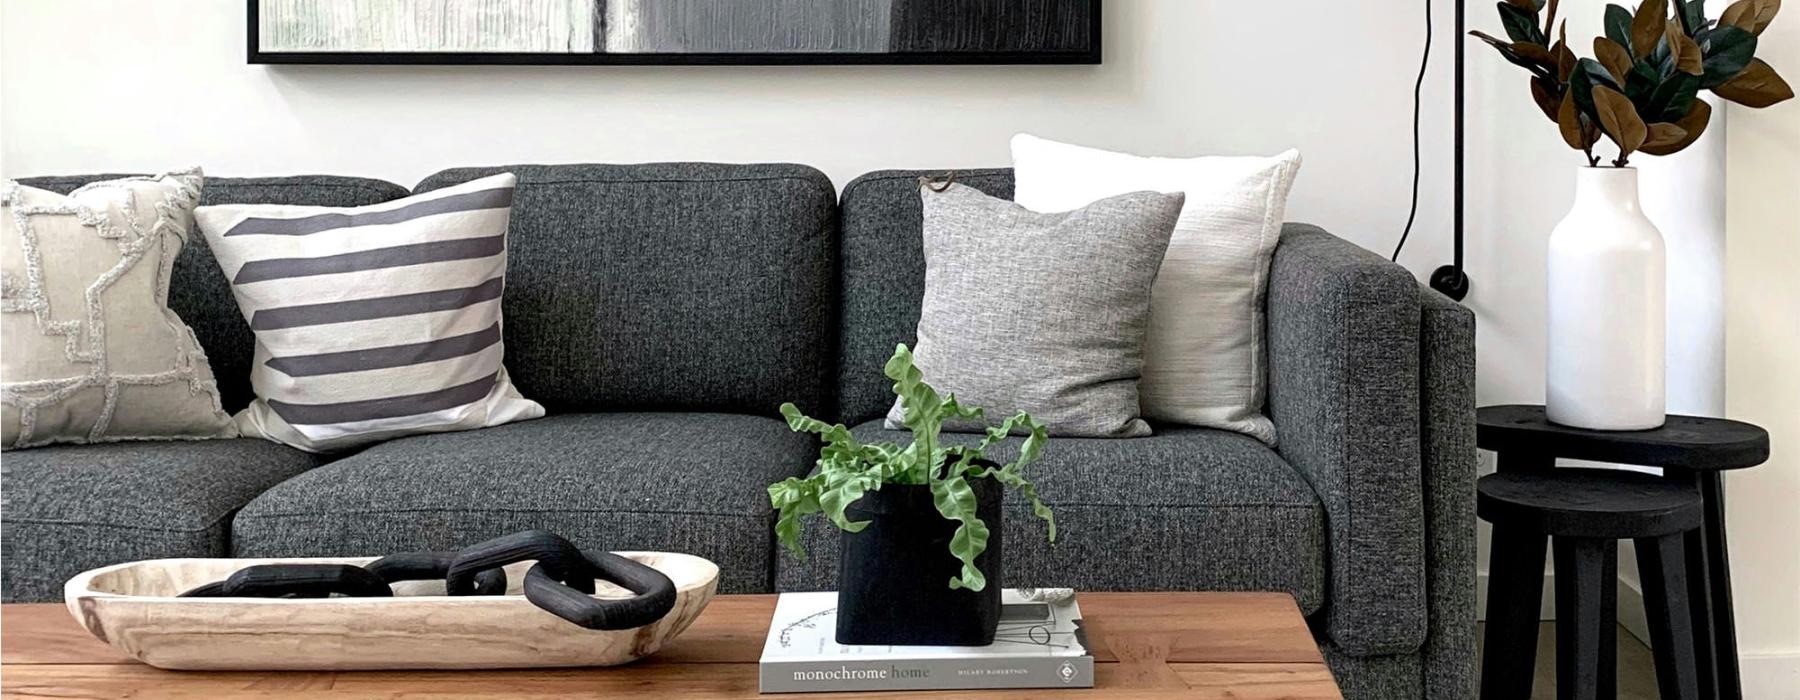 a couch with a coffee table with a plant and decor on it